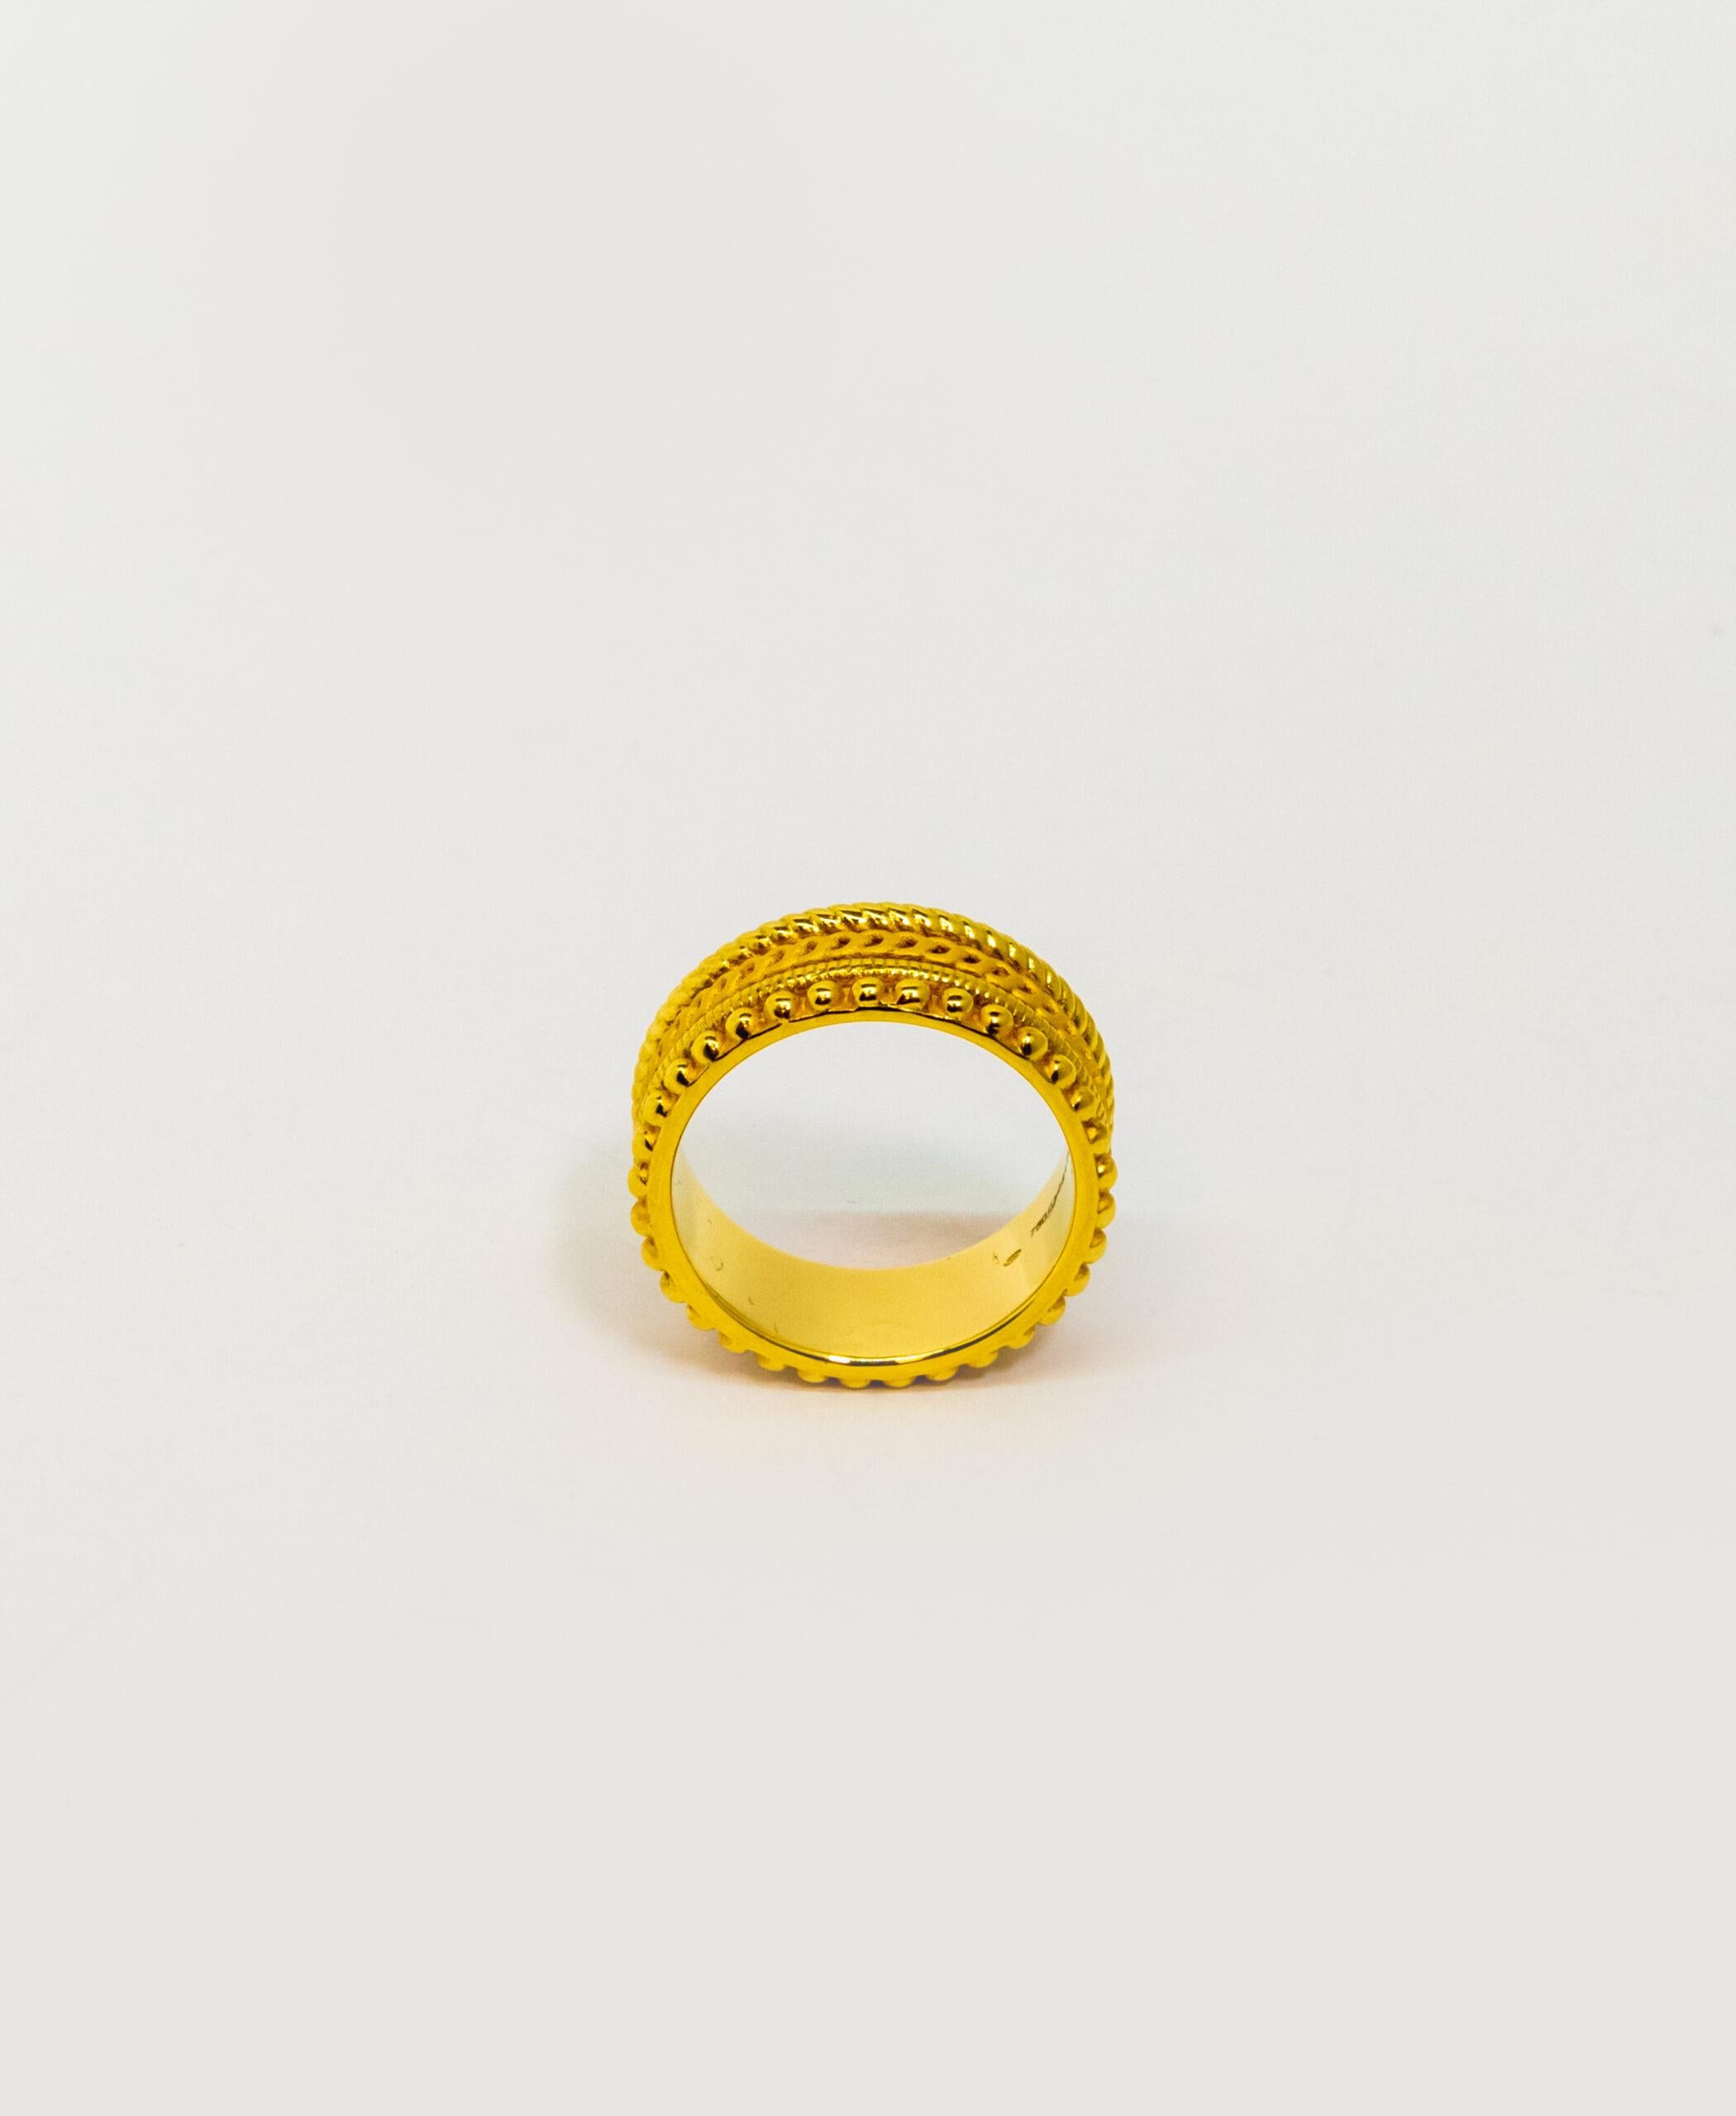 This ring is made out of 4 ring made of 18K Yellow Gold. All 4 rings have a different “chain” styles and connected in one piece.

Size – 54.5 (7 US)